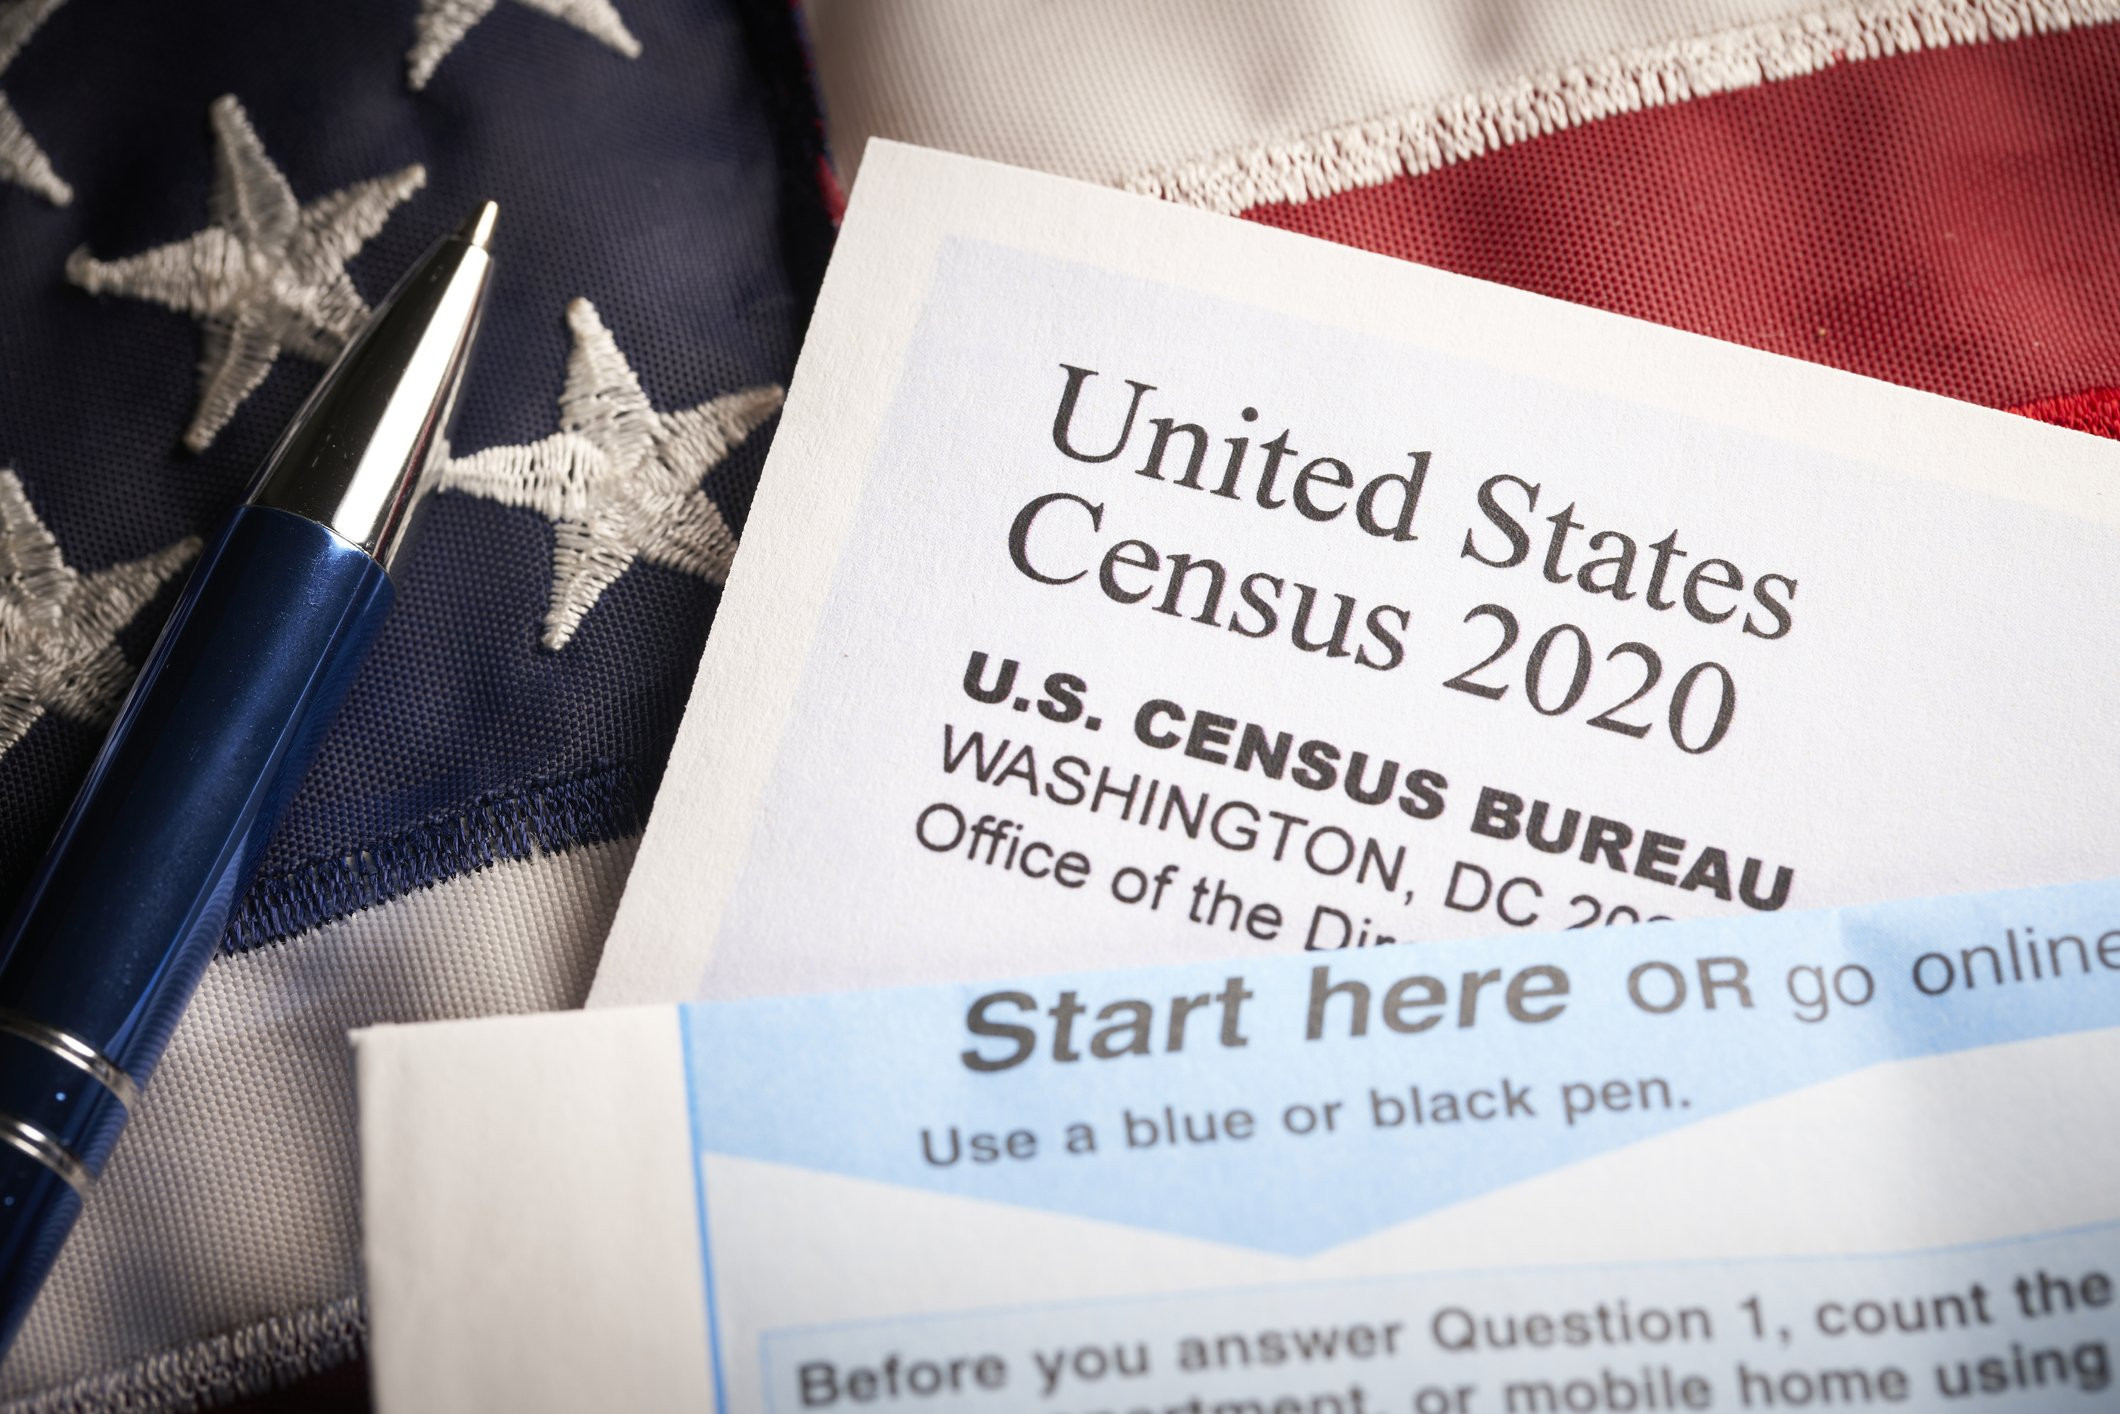 A copy of the United States Census 2020 form lays on an American flag with a blue pen to its left.